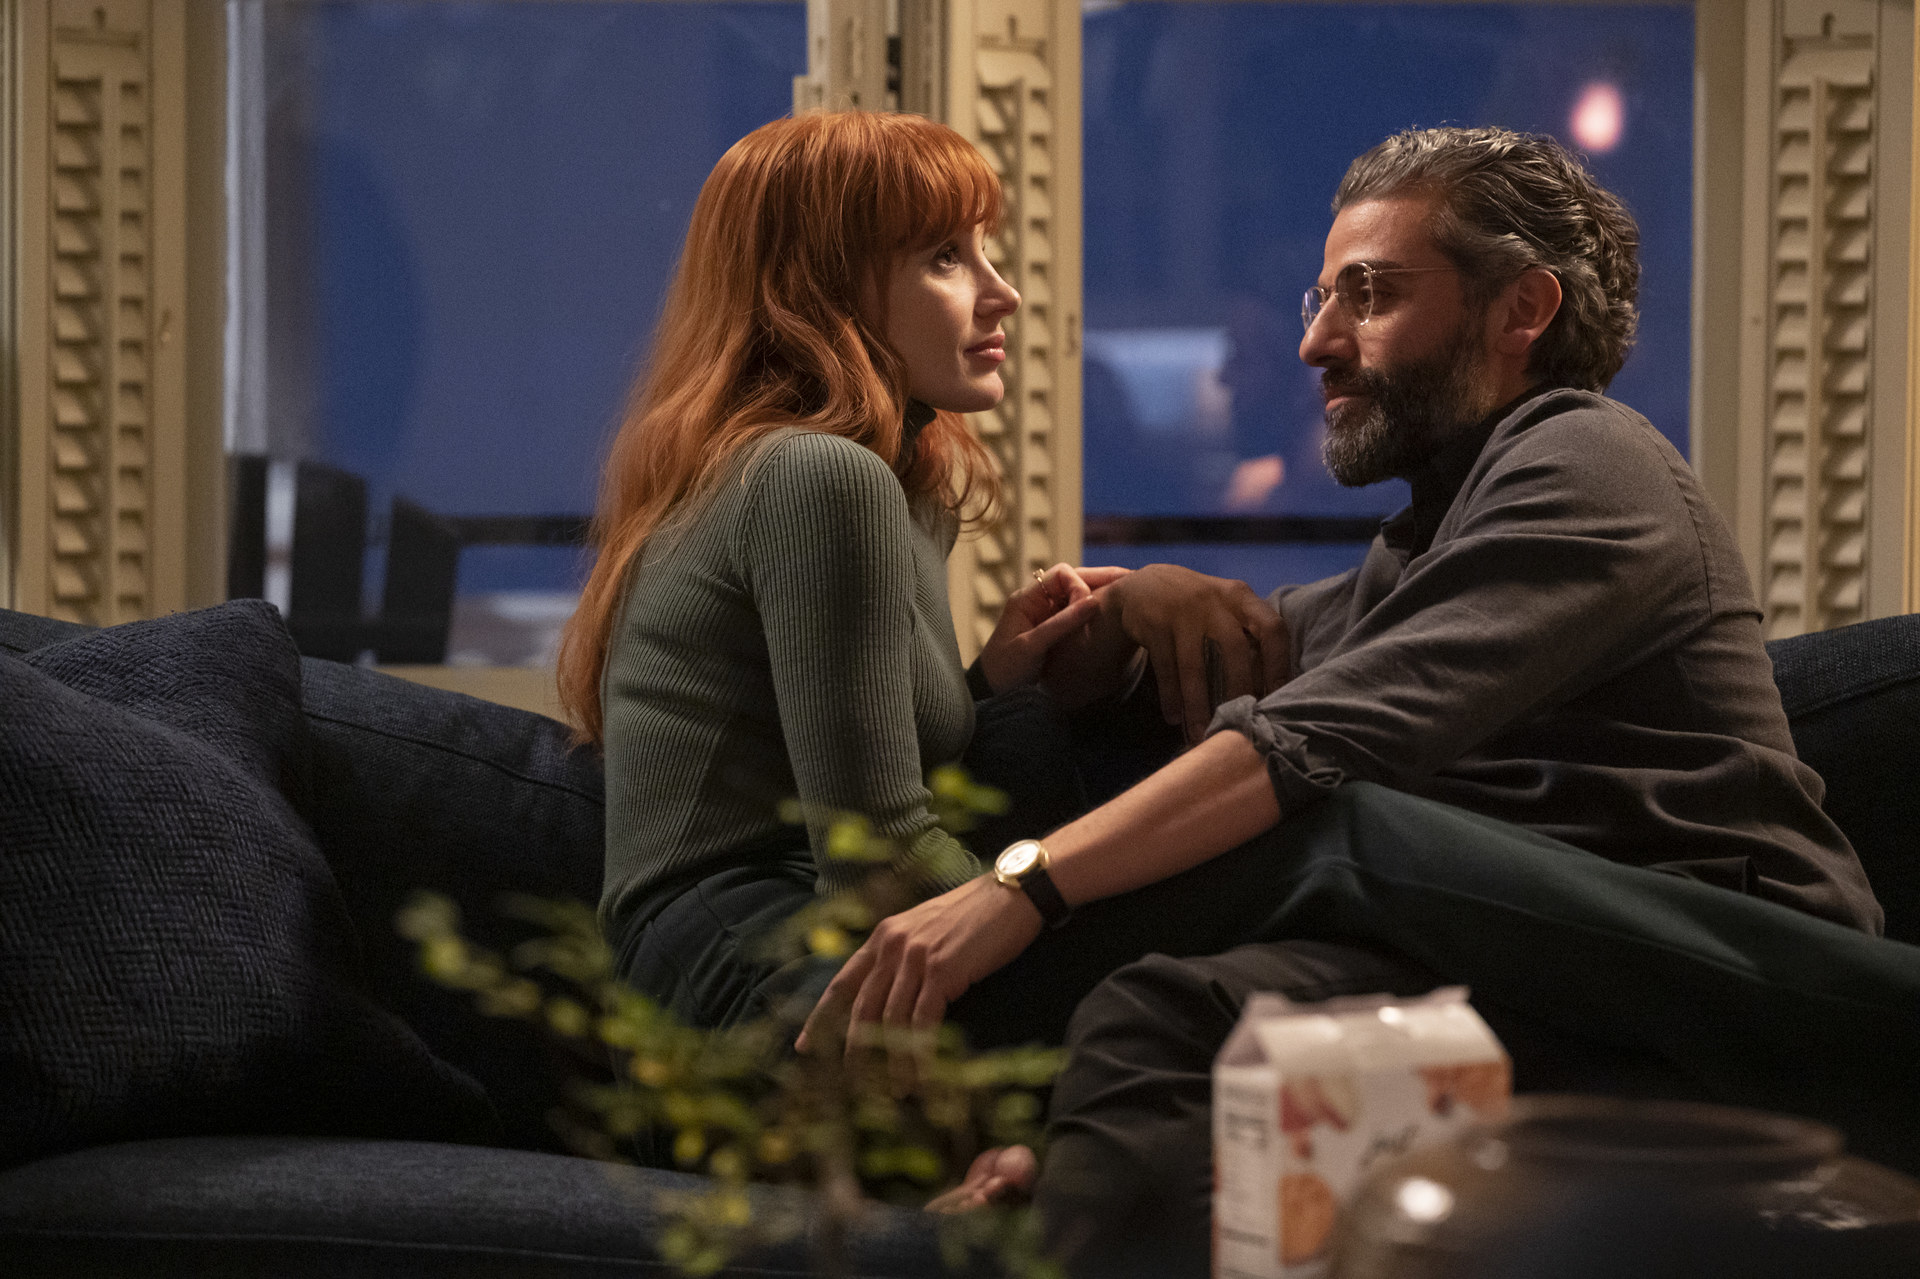 Jessica Chastain and Oscar Isaac sit on a couch together